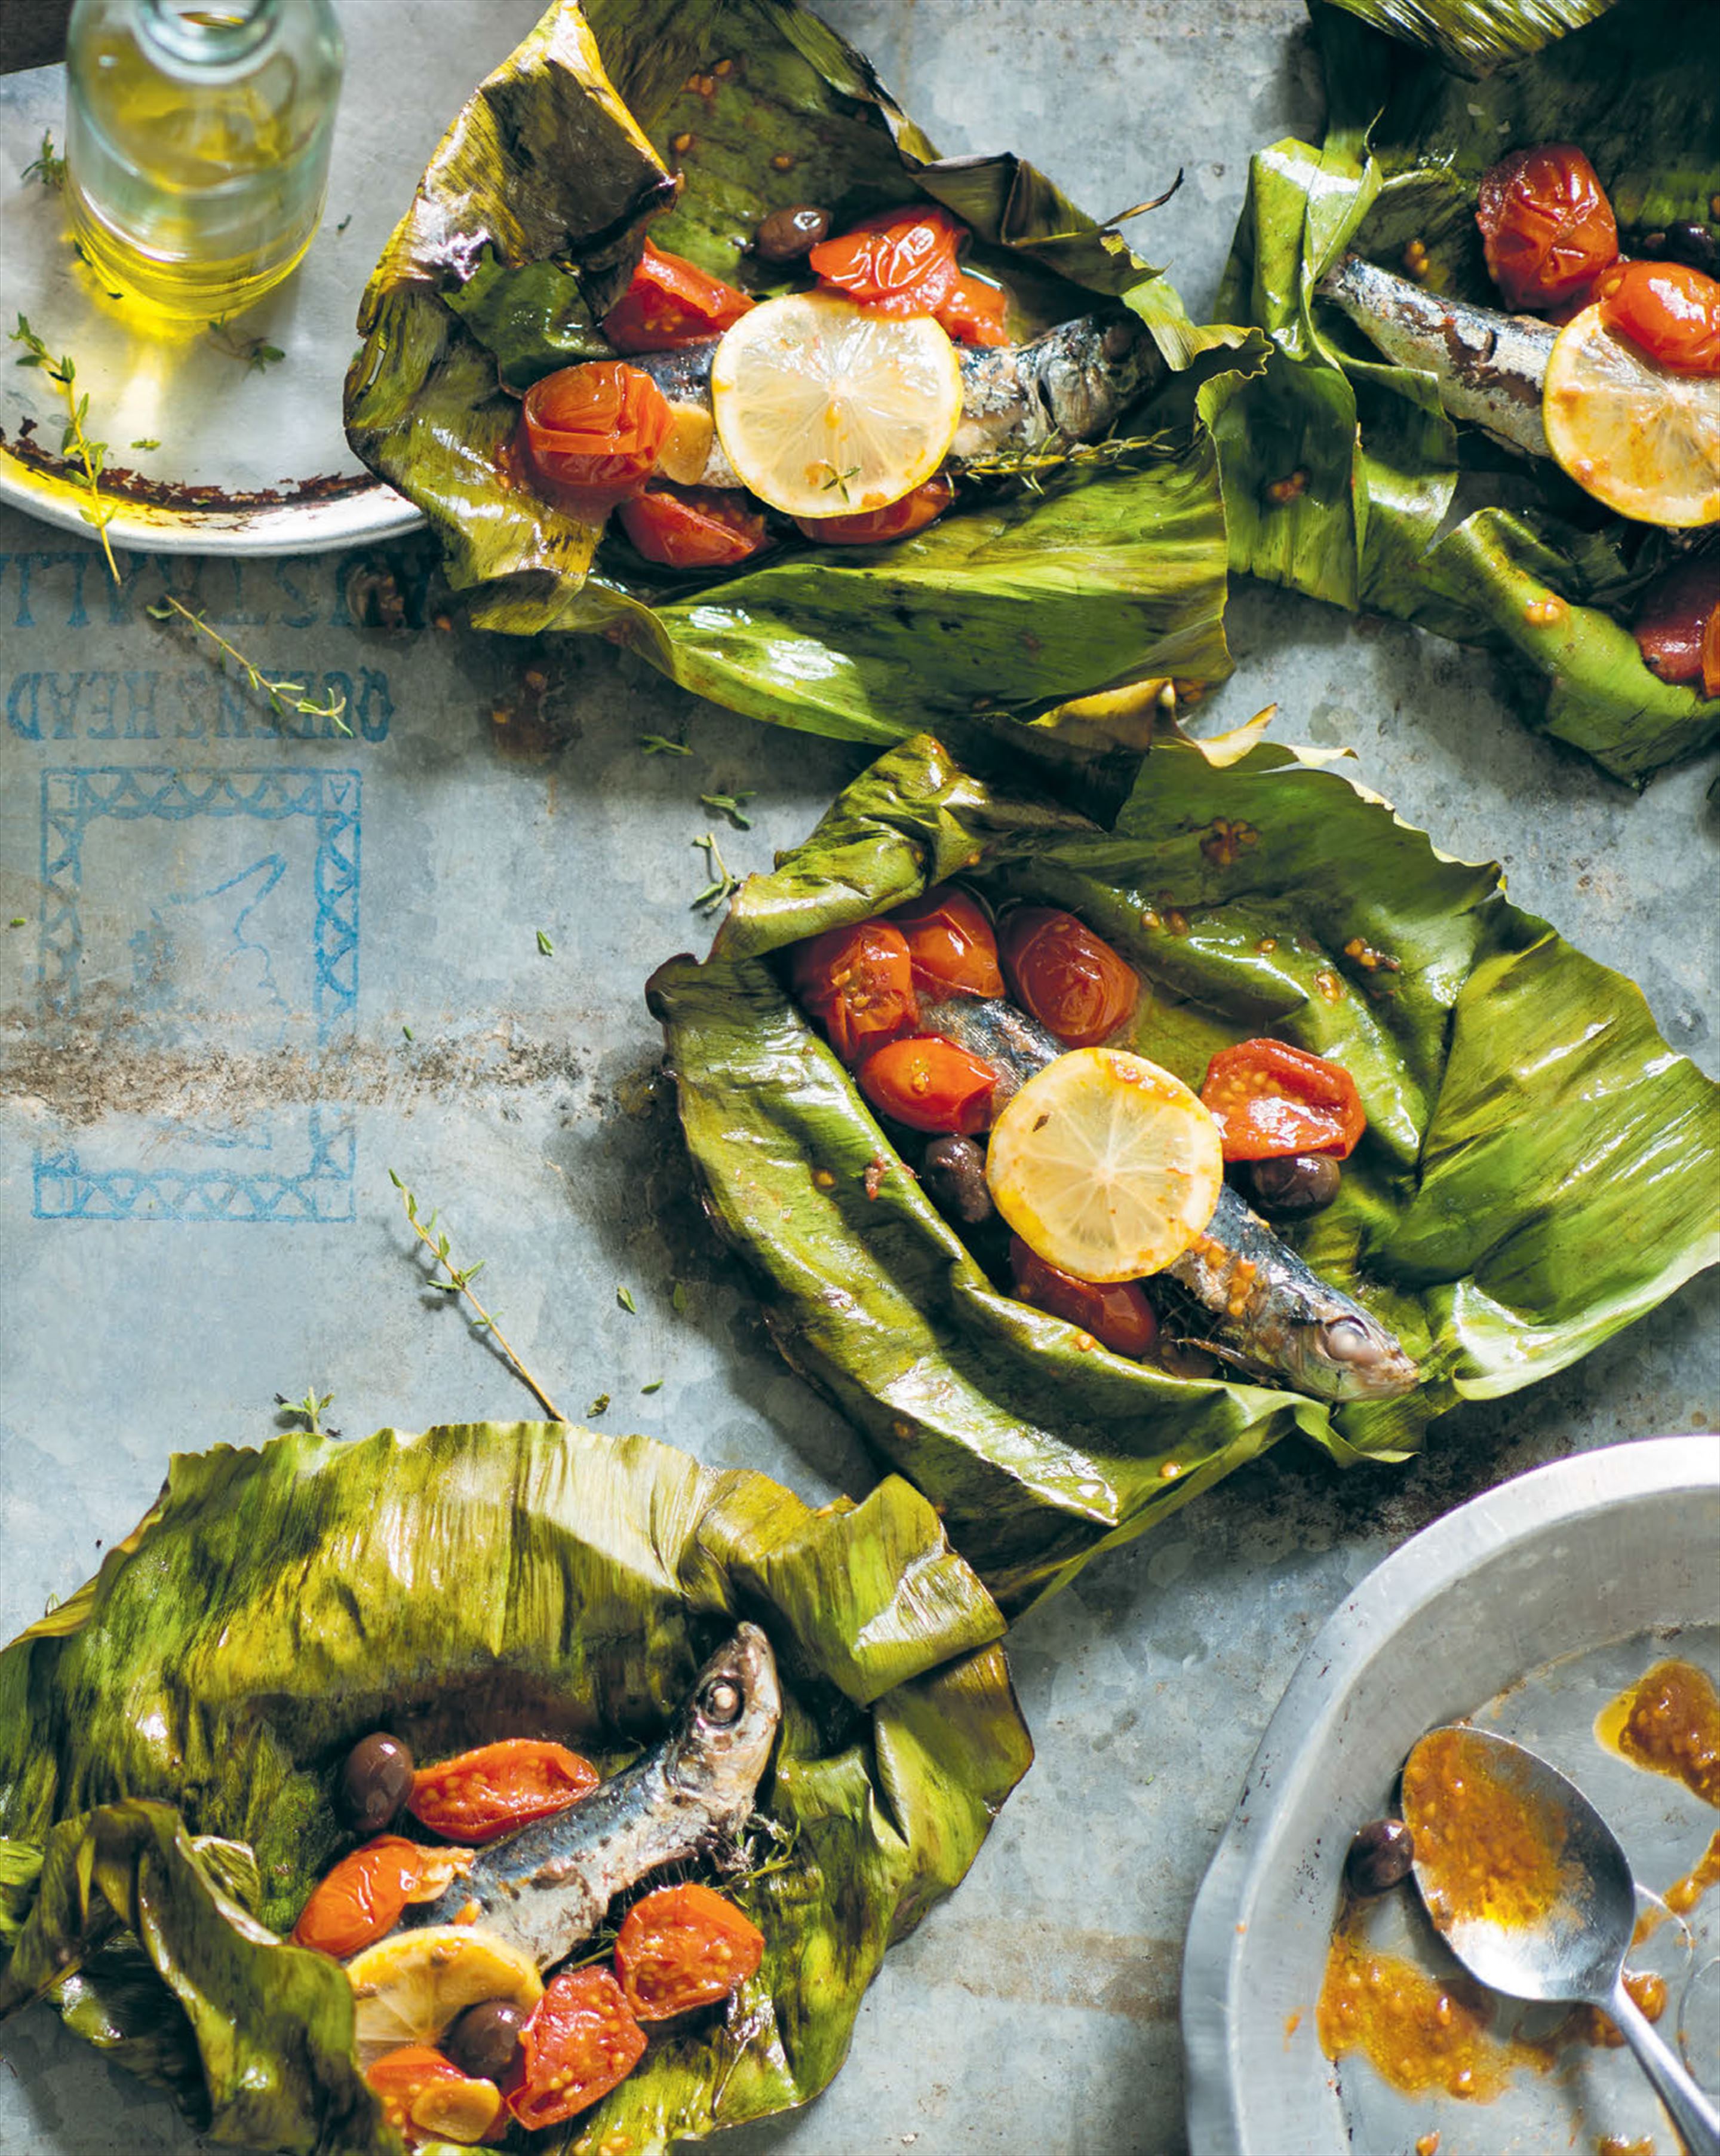 Sardines roasted in banana leaves with olives & cherry tomatoes